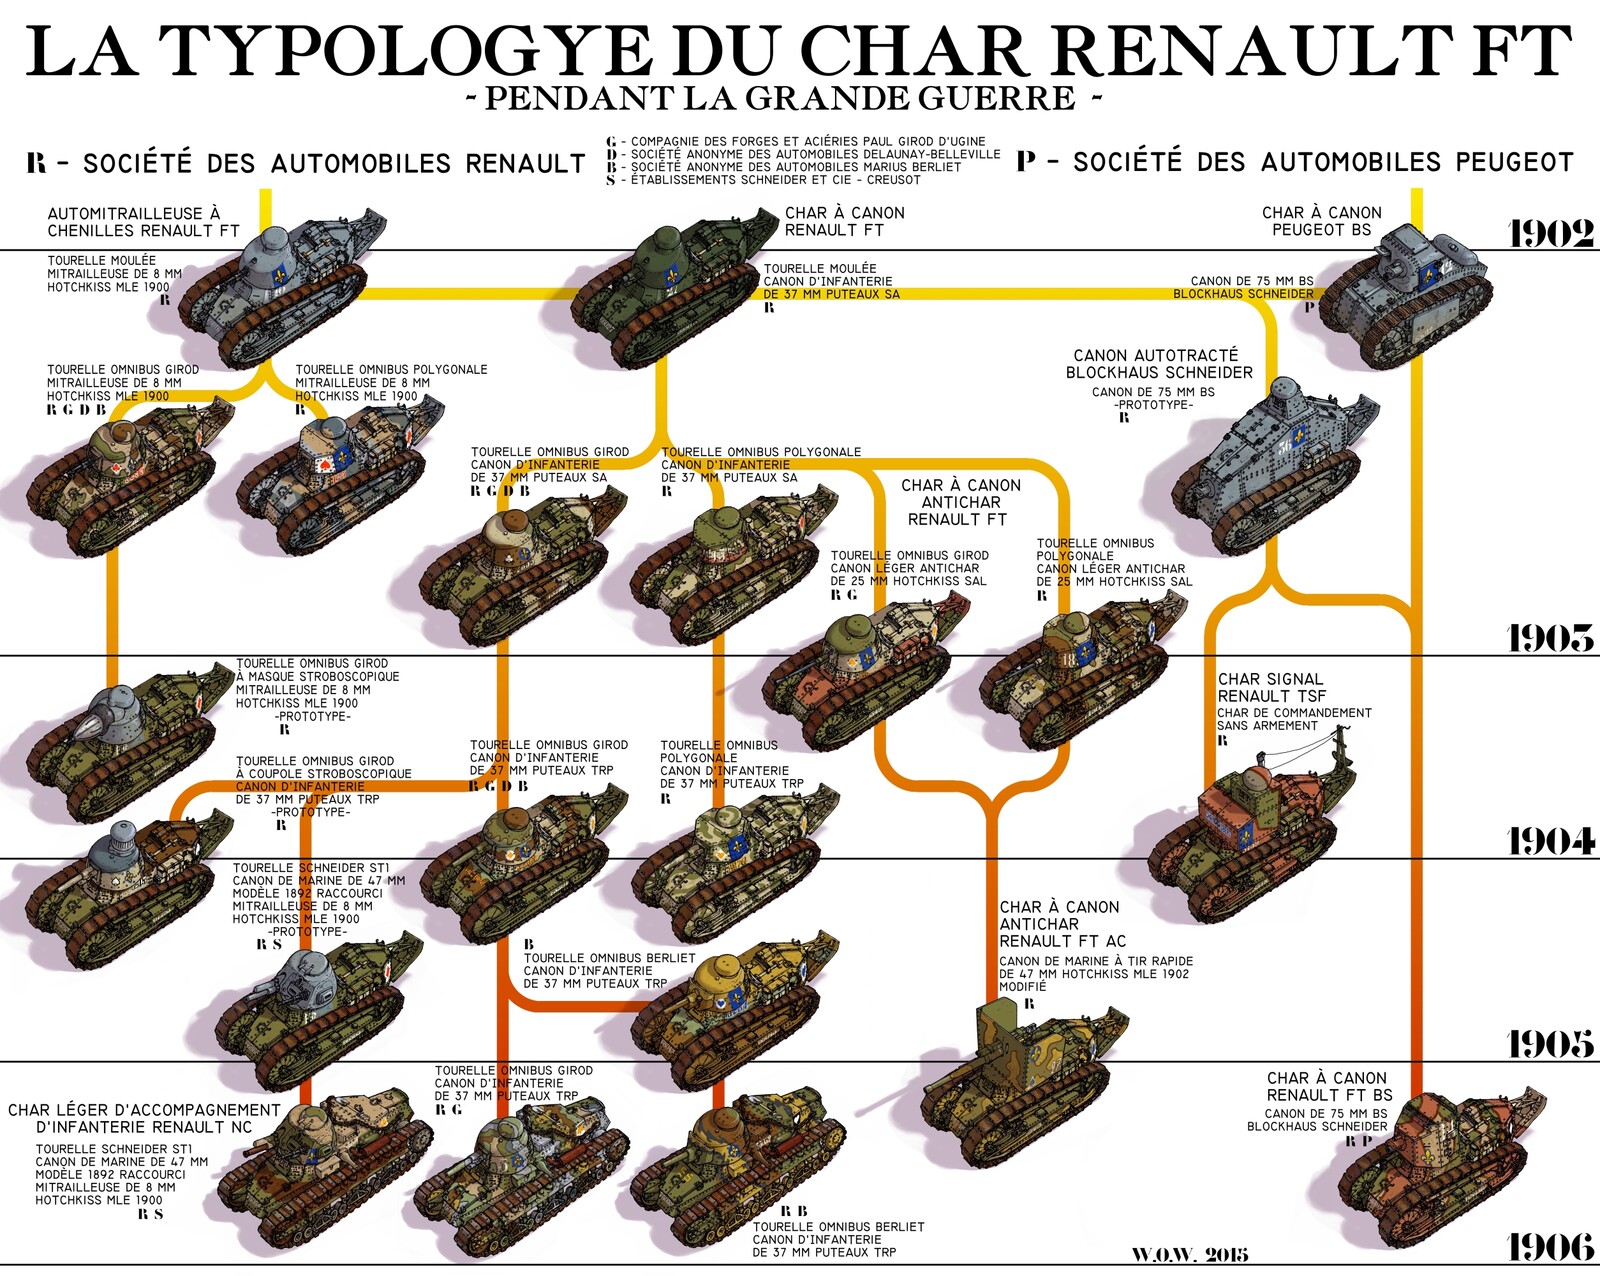 The typology of the Renault FT light tank, as used by the Second French Empire during the Great War against the British Imperial Federation, 1899 to 1907.
Alternate-history steam/dieselpunk. 